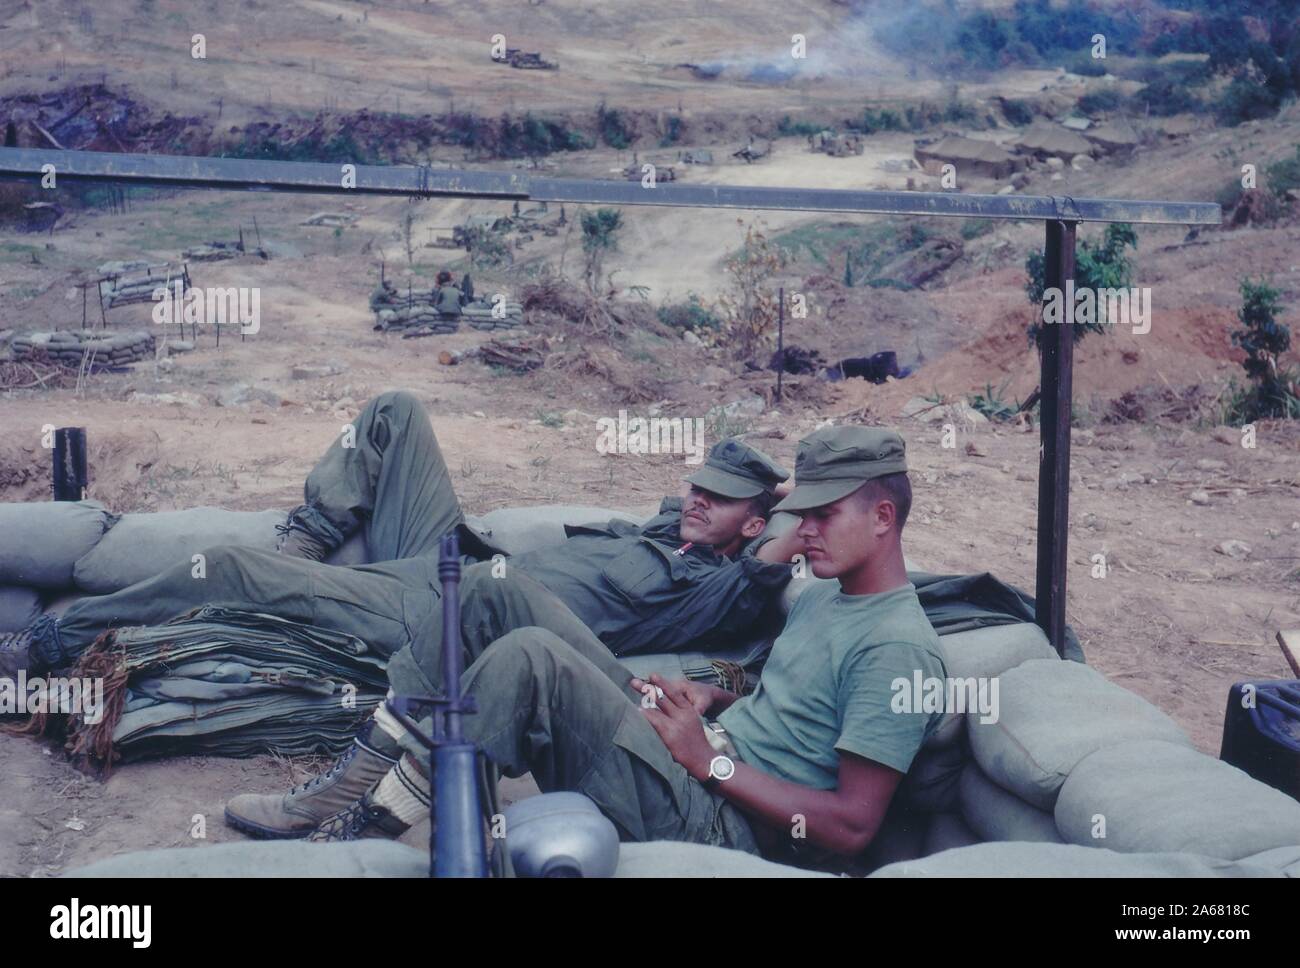 Profile shot of two American servicemen lounging in a sandbag bunker, with more bunkers, tanks, and camp tents in the background, Vietnam, 1965. () Stock Photo